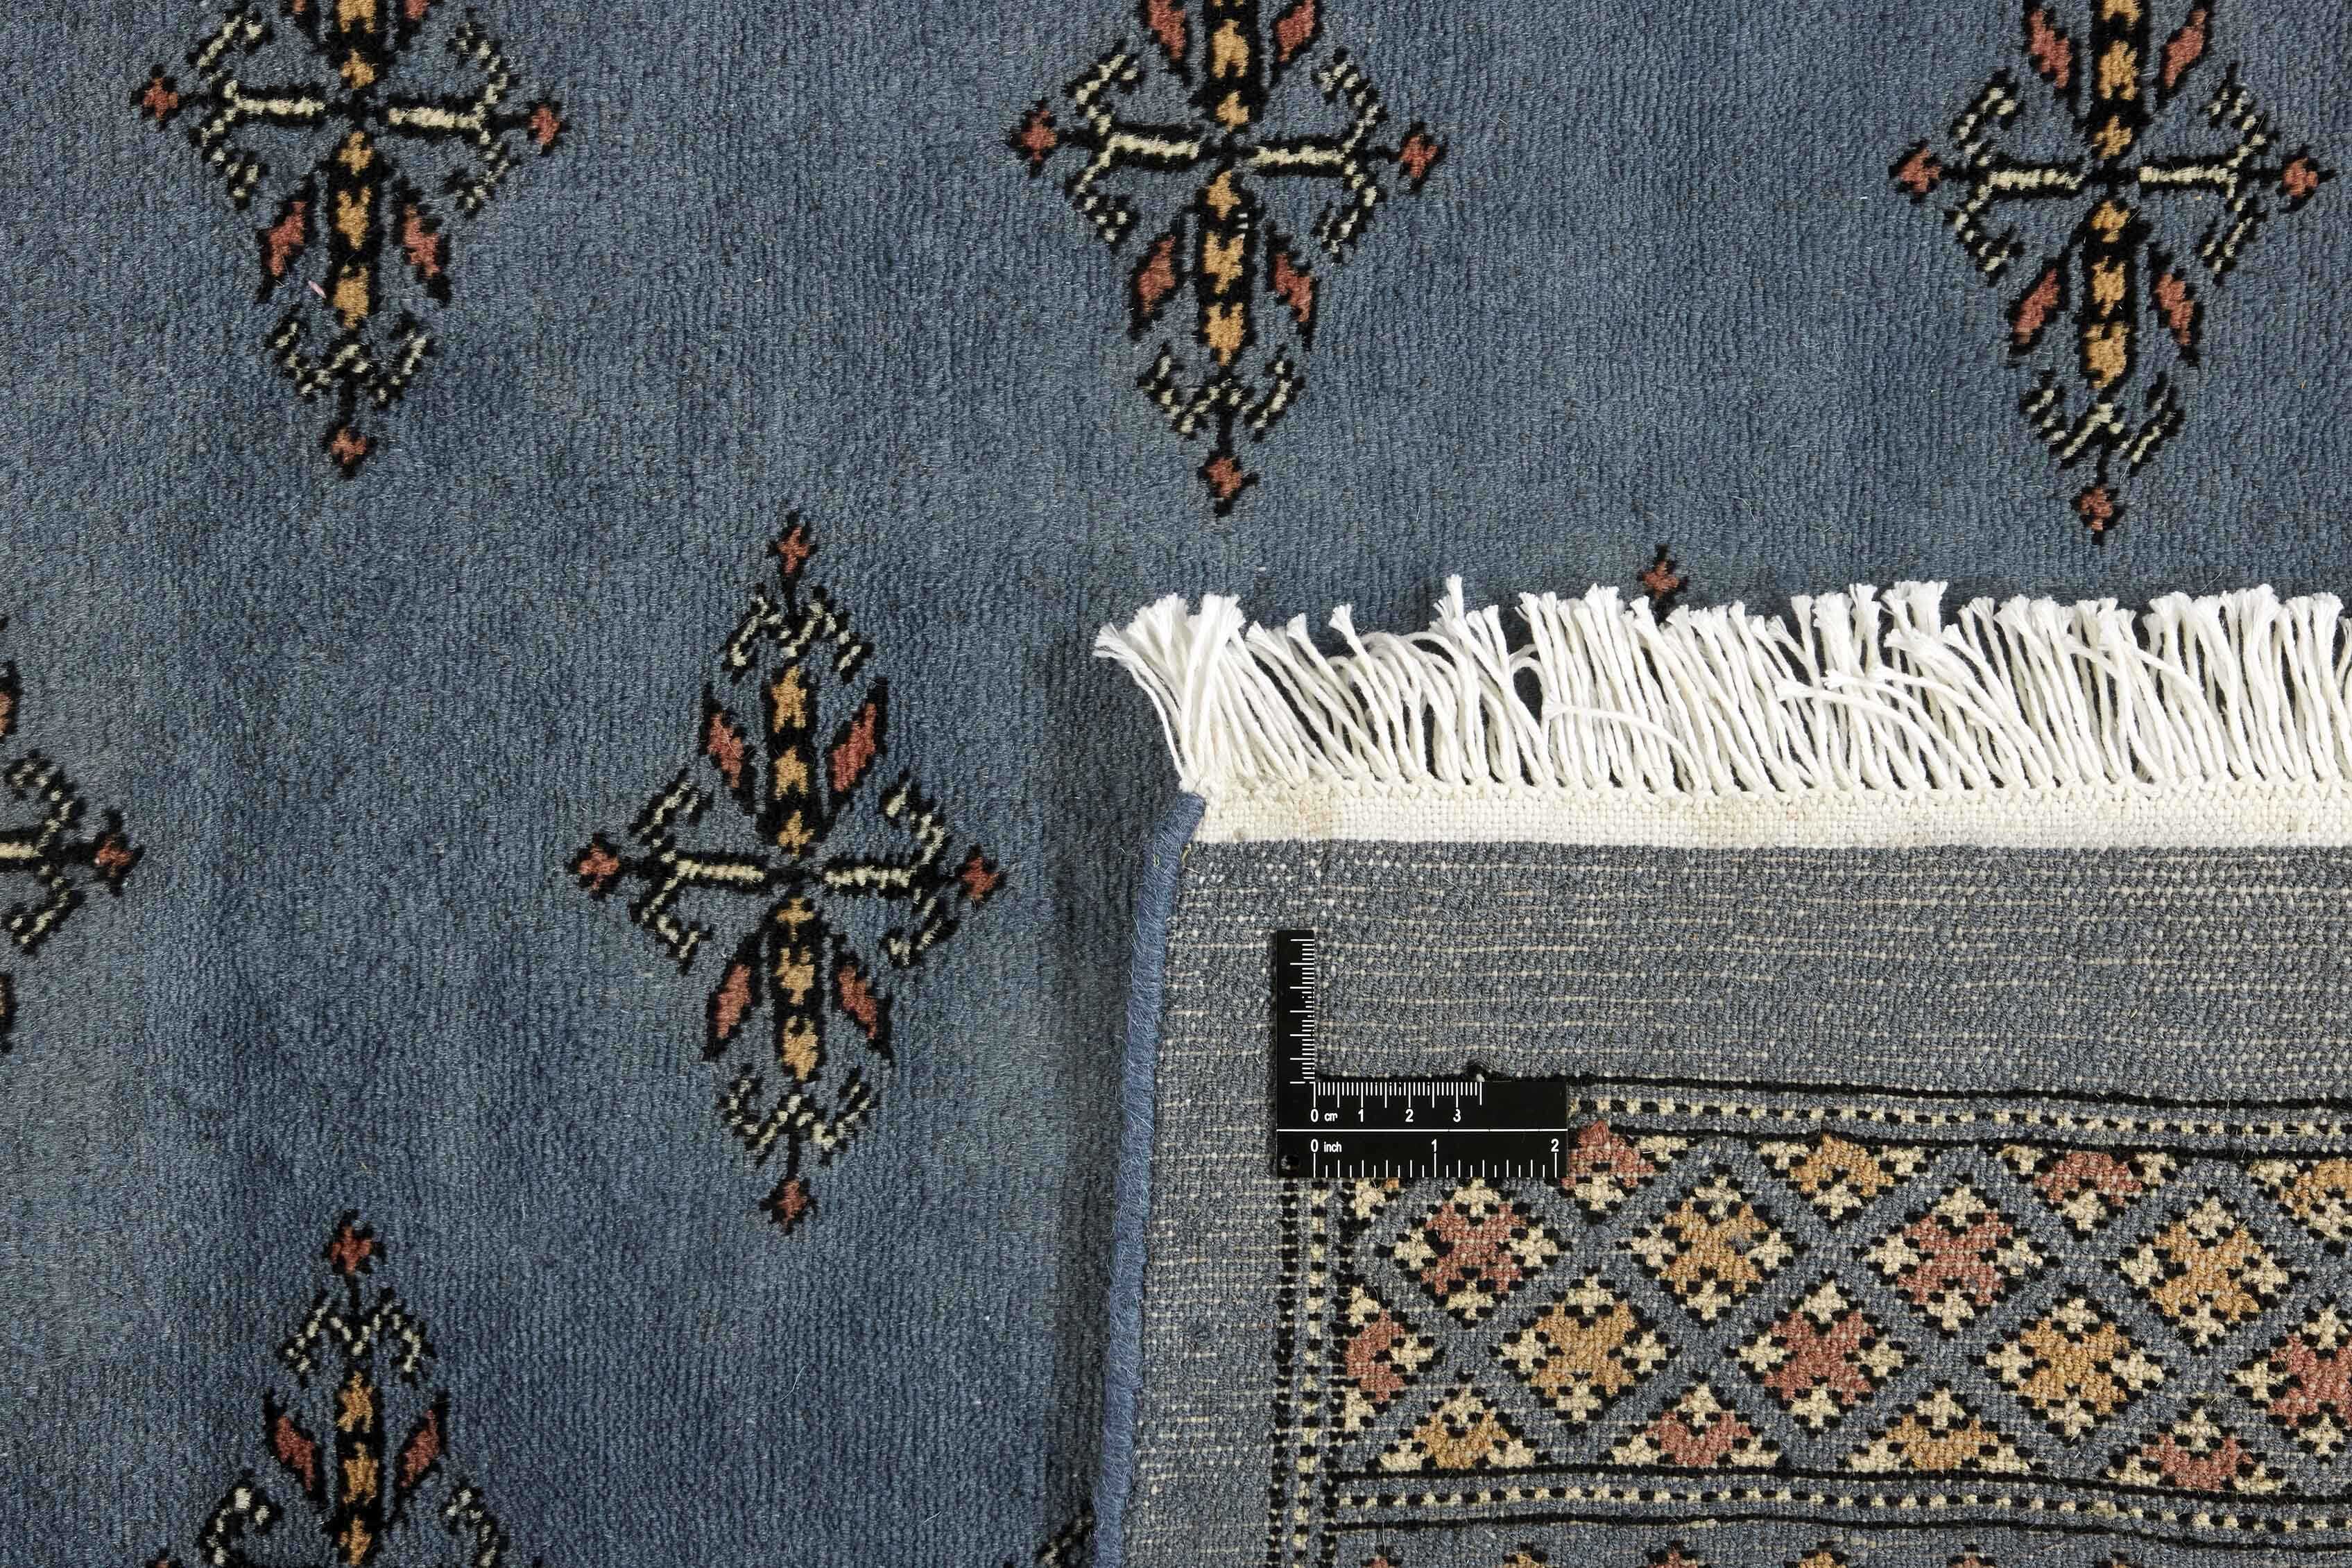 blue oriental rug with traditional pattern